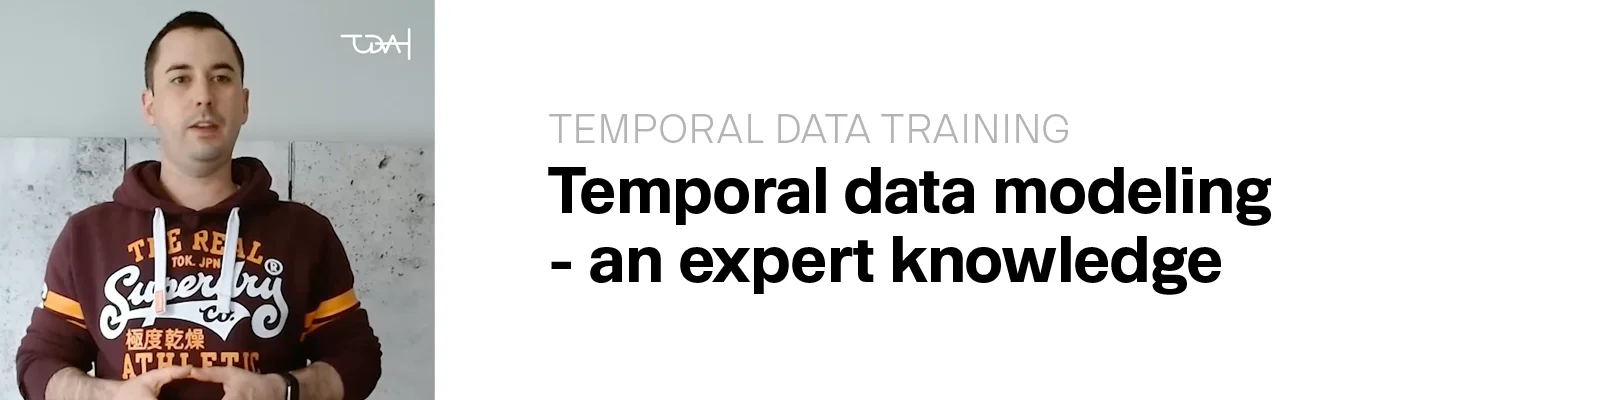 TEDAMOH - Temporal Data Modeling - an expert knowledge - Photo by GR Stocks on Unsplash